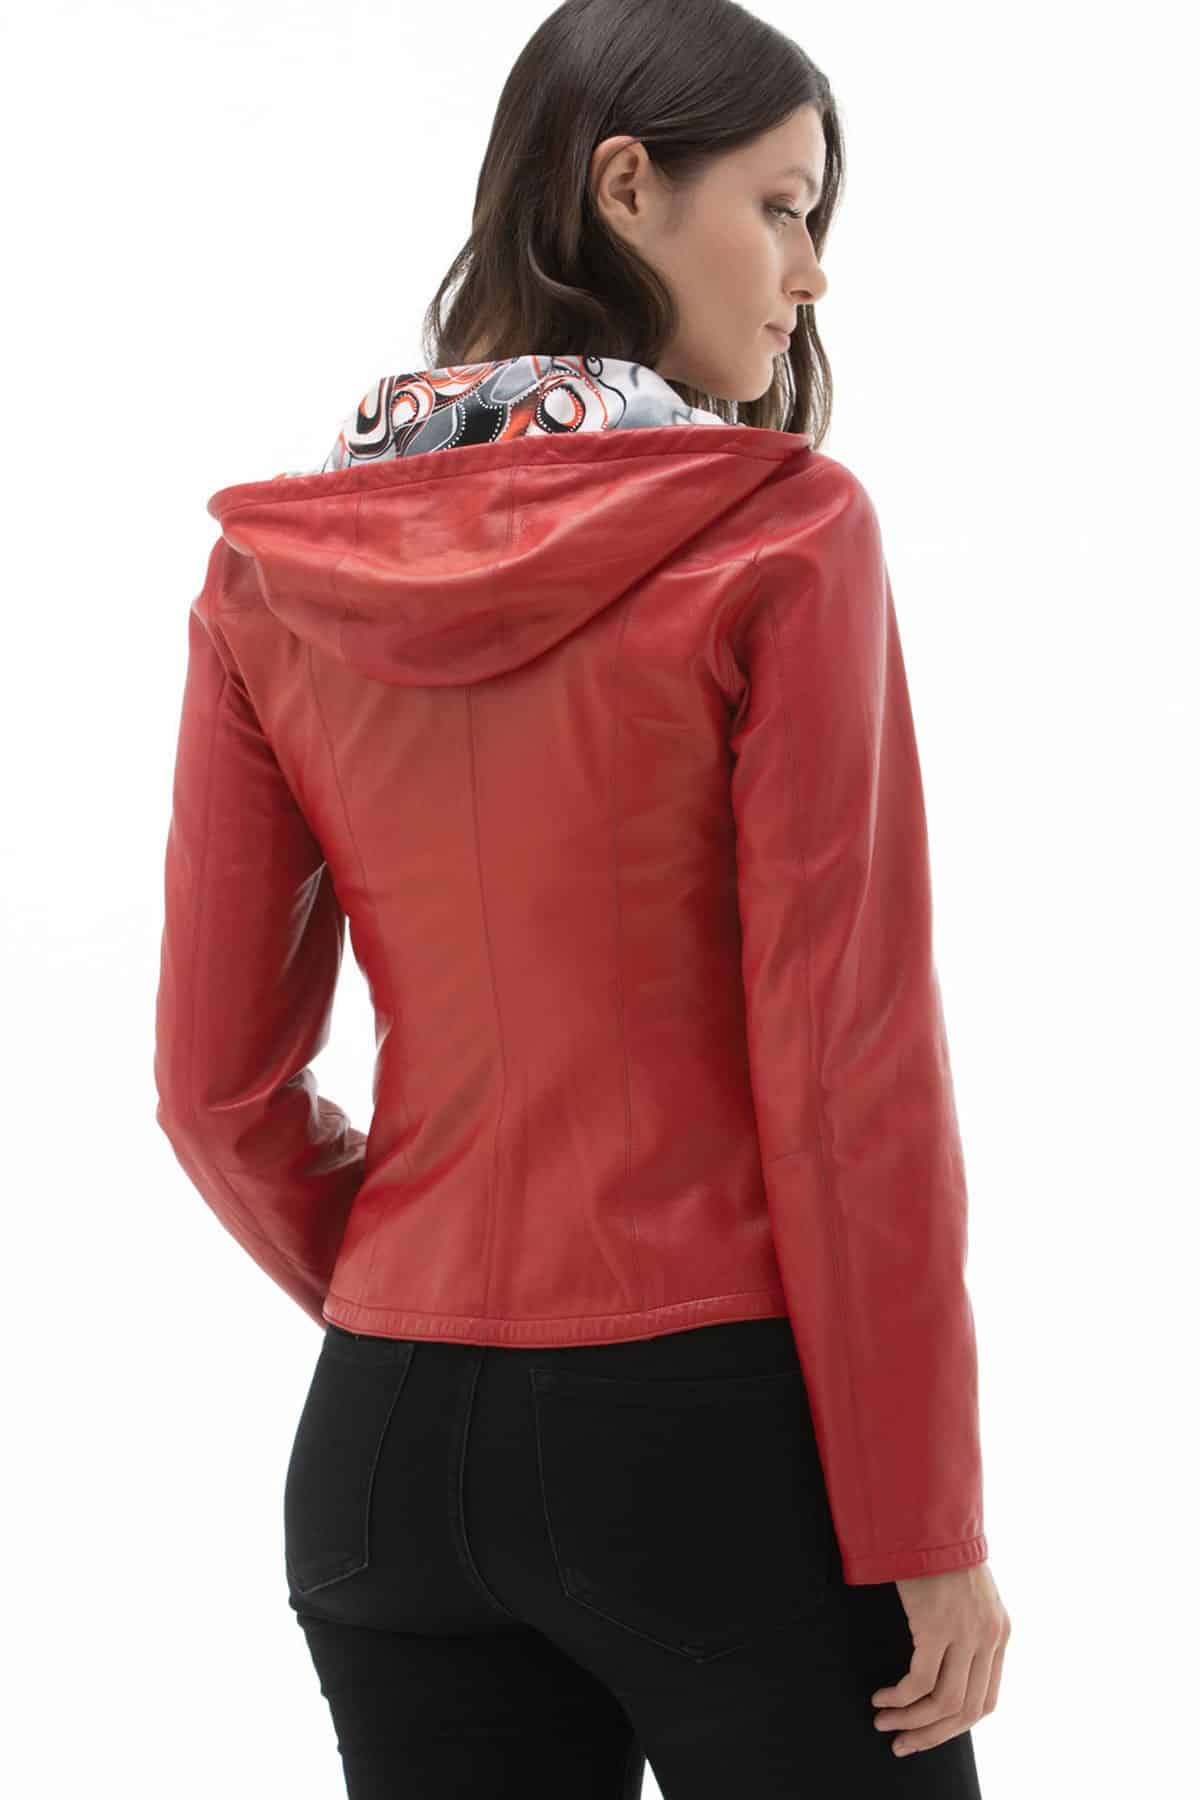 Womens Reversible Hooded Red Leather Jacket Back2